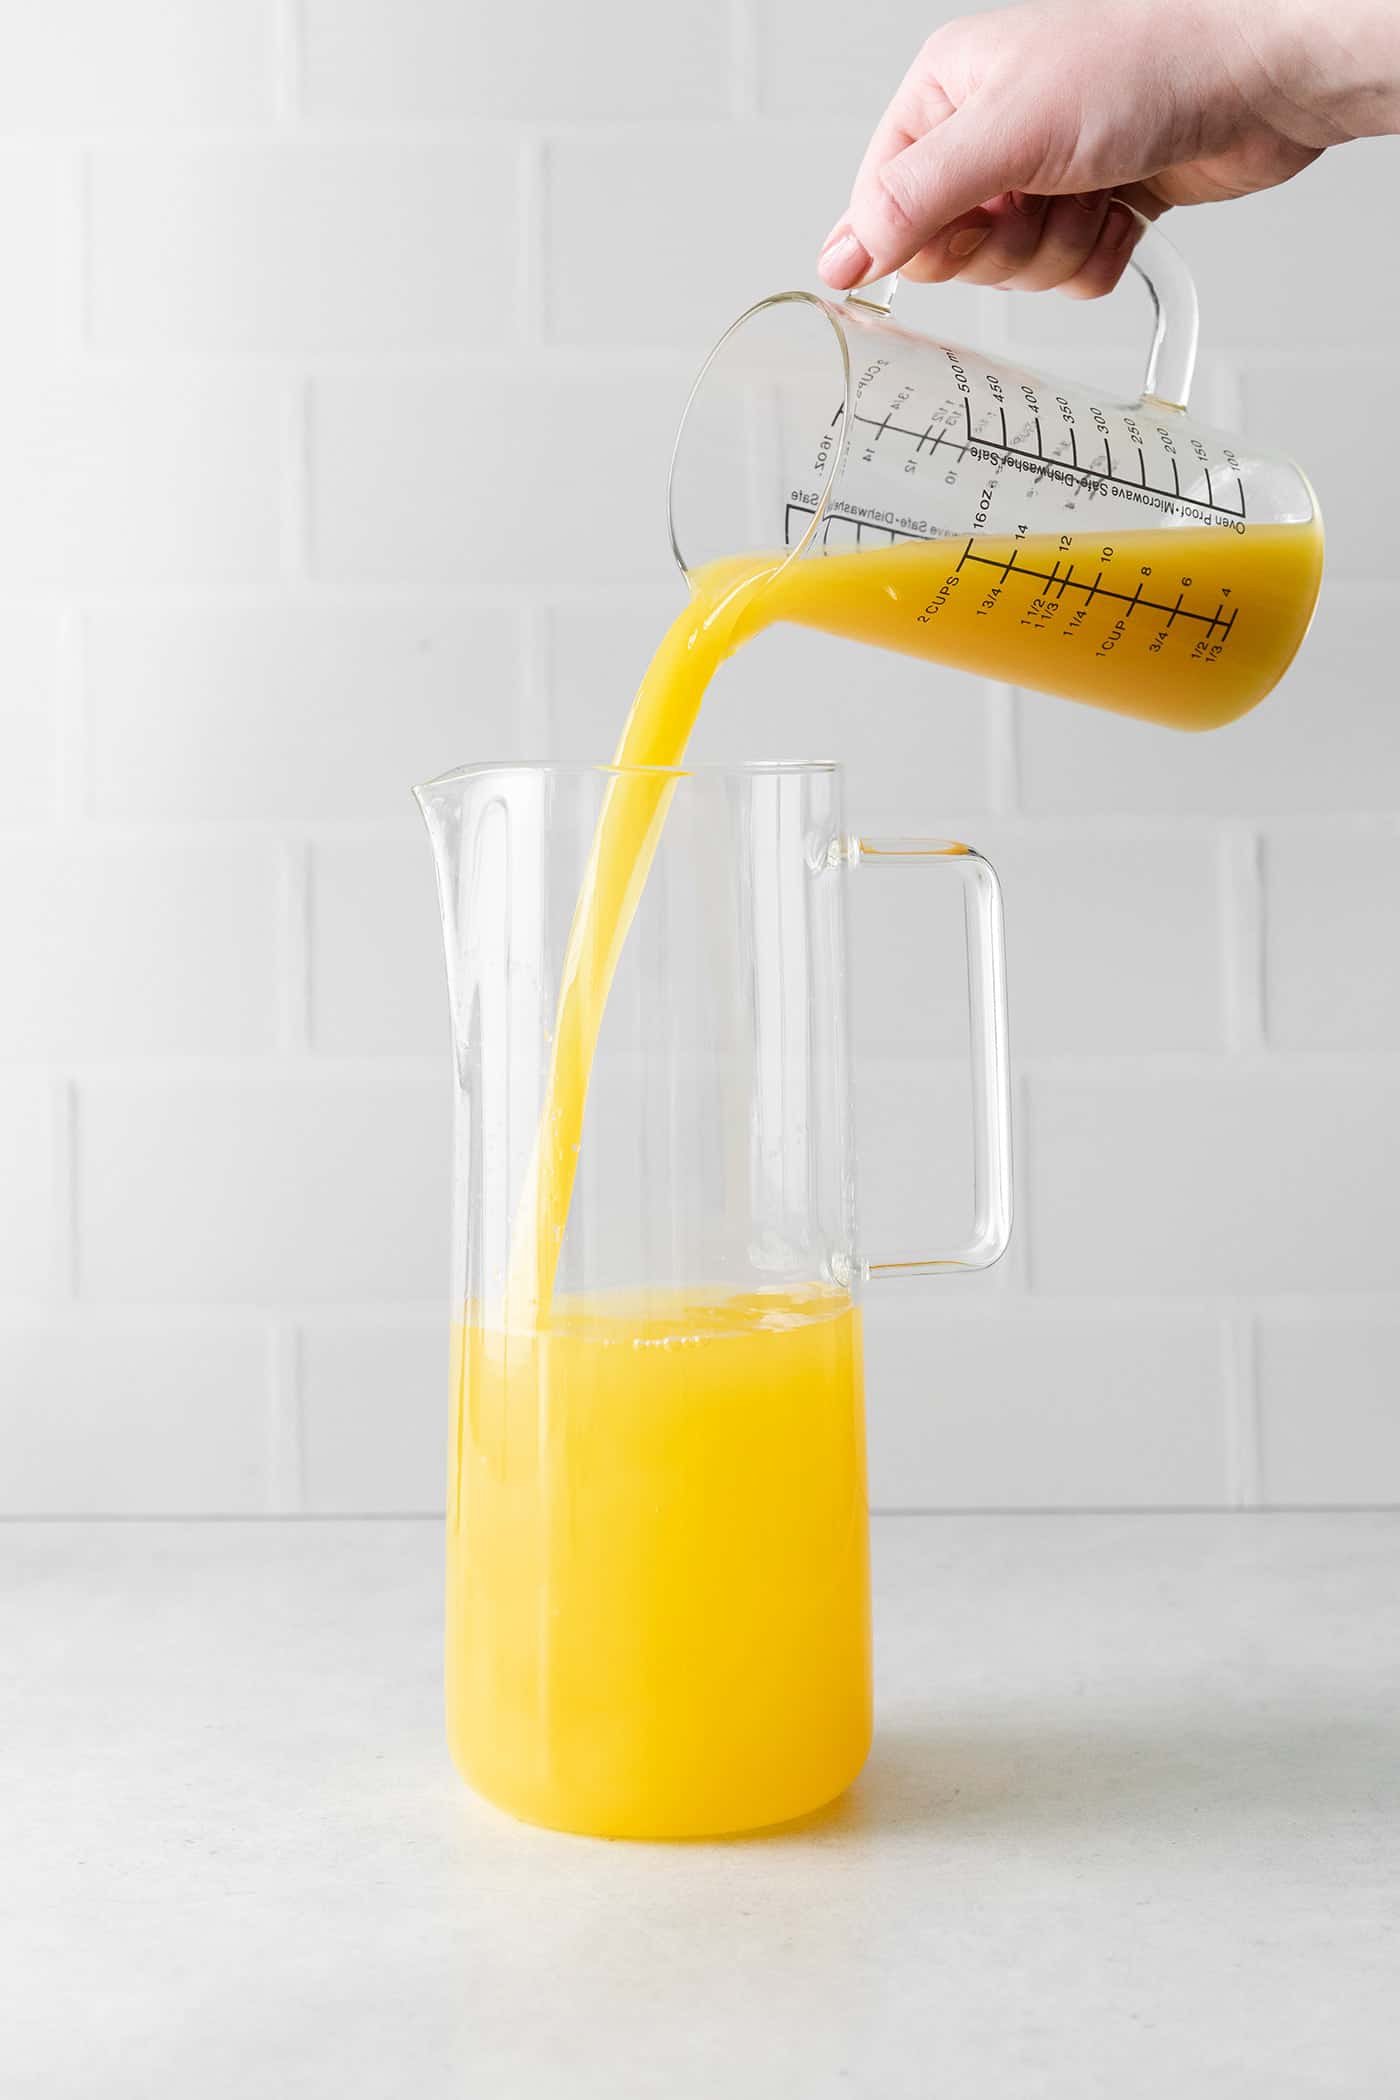 Orange juice being added to a pitcher with wine